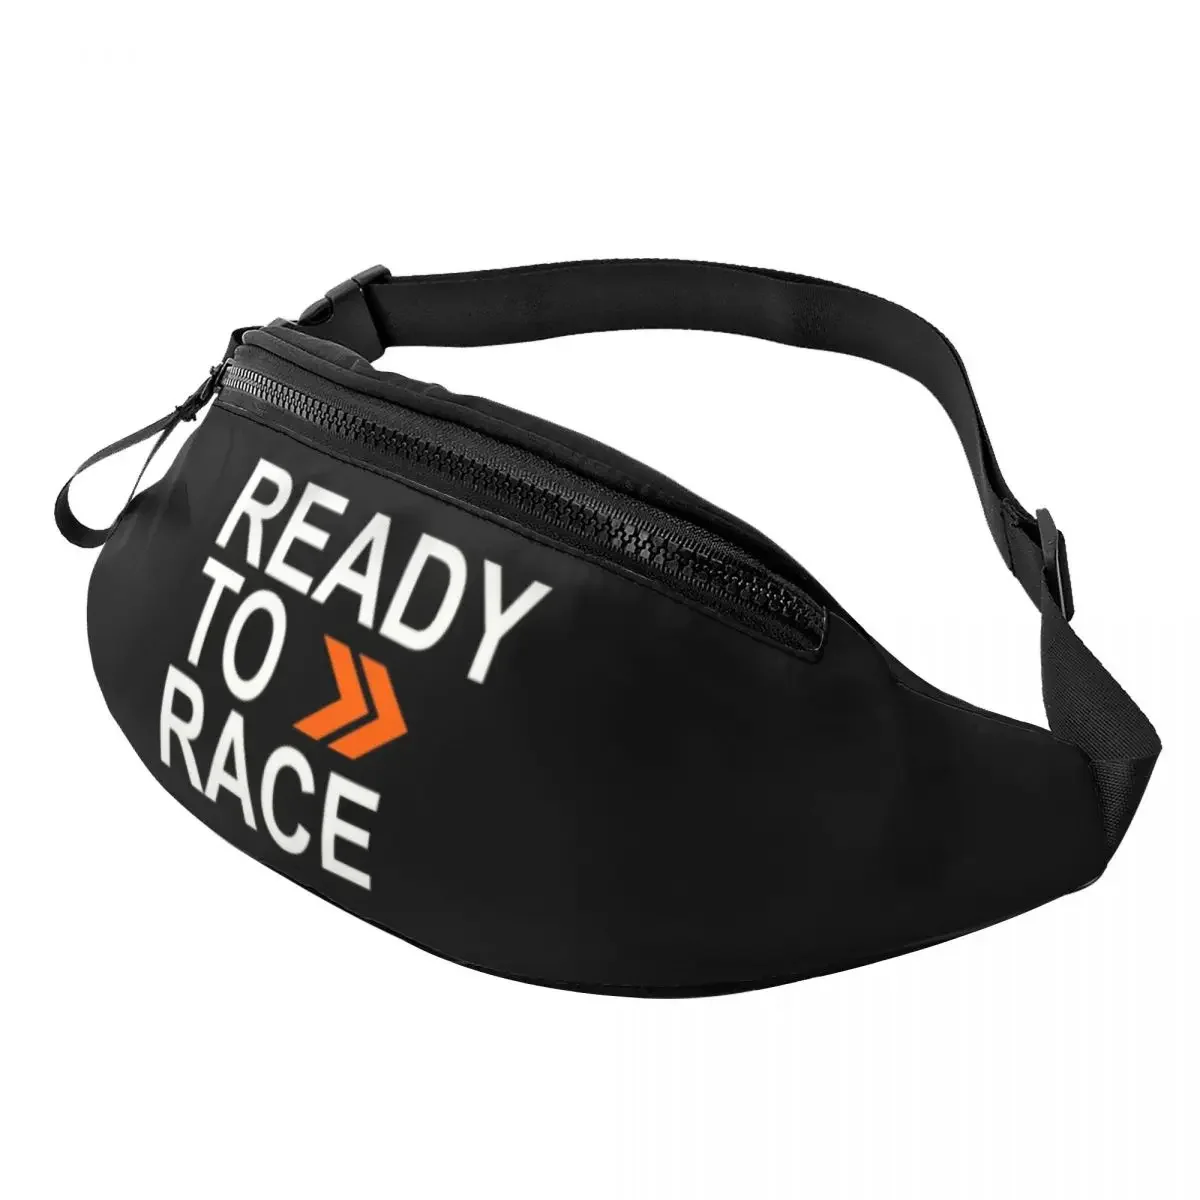 

Ready To Race Car Motorcycle Fanny Pack Women Men Custom Crossbody Waist Bag for Travel Hiking Phone Money Pouch